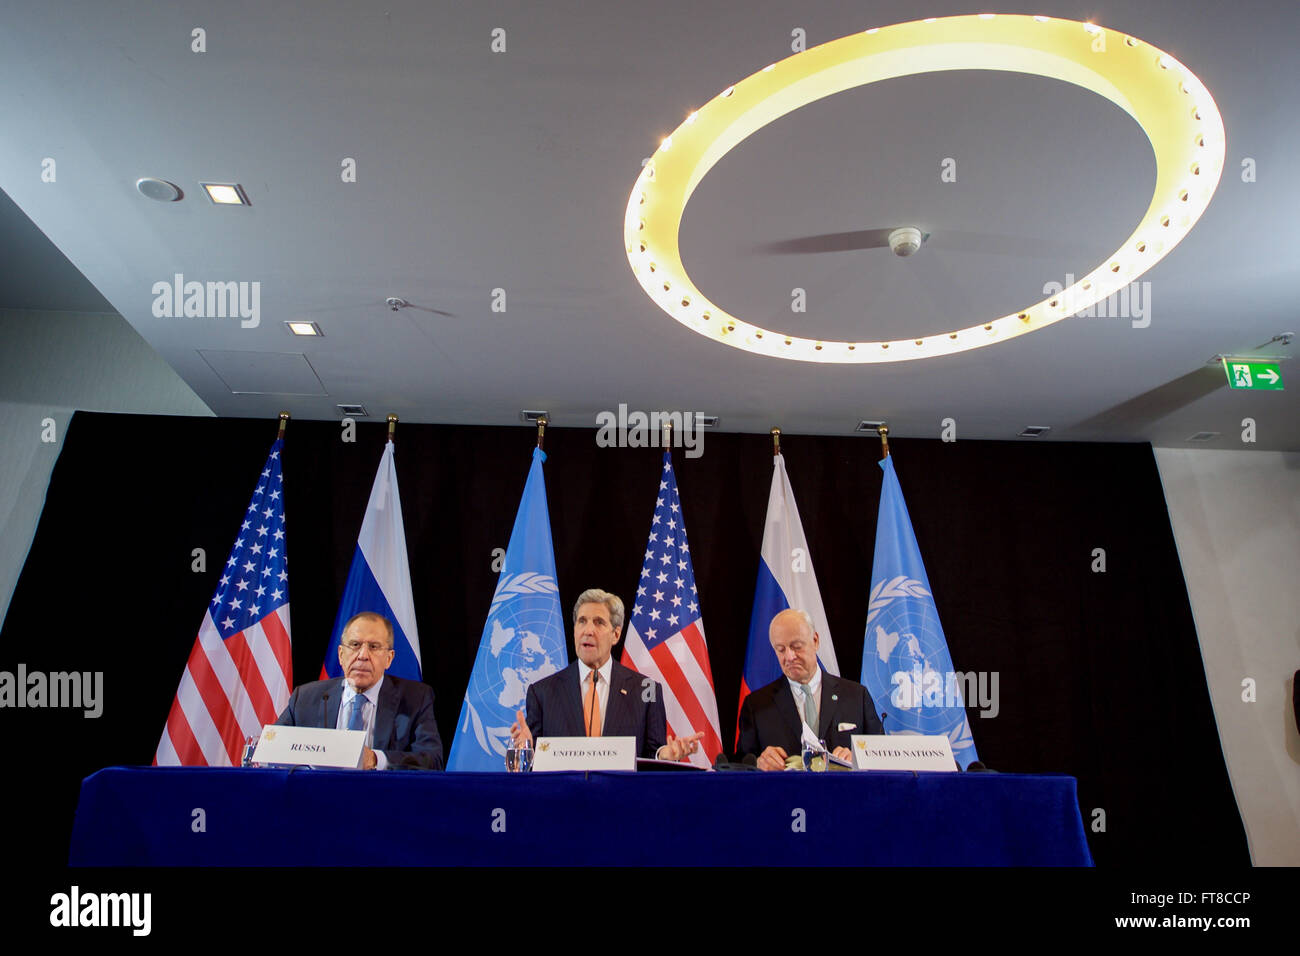 U.S. Secretary of State John Kerry, joined by Russian Foreign Minister Sergey Lavrov and United Nations Special Envoy for Syria Staffan de Mistura, addresses the media on February 12, 2016, at the Hilton Hotel join Munich, Germany, following a meeting of the International Syria Support Group. [State Department photo/ Public Domain] Stock Photo